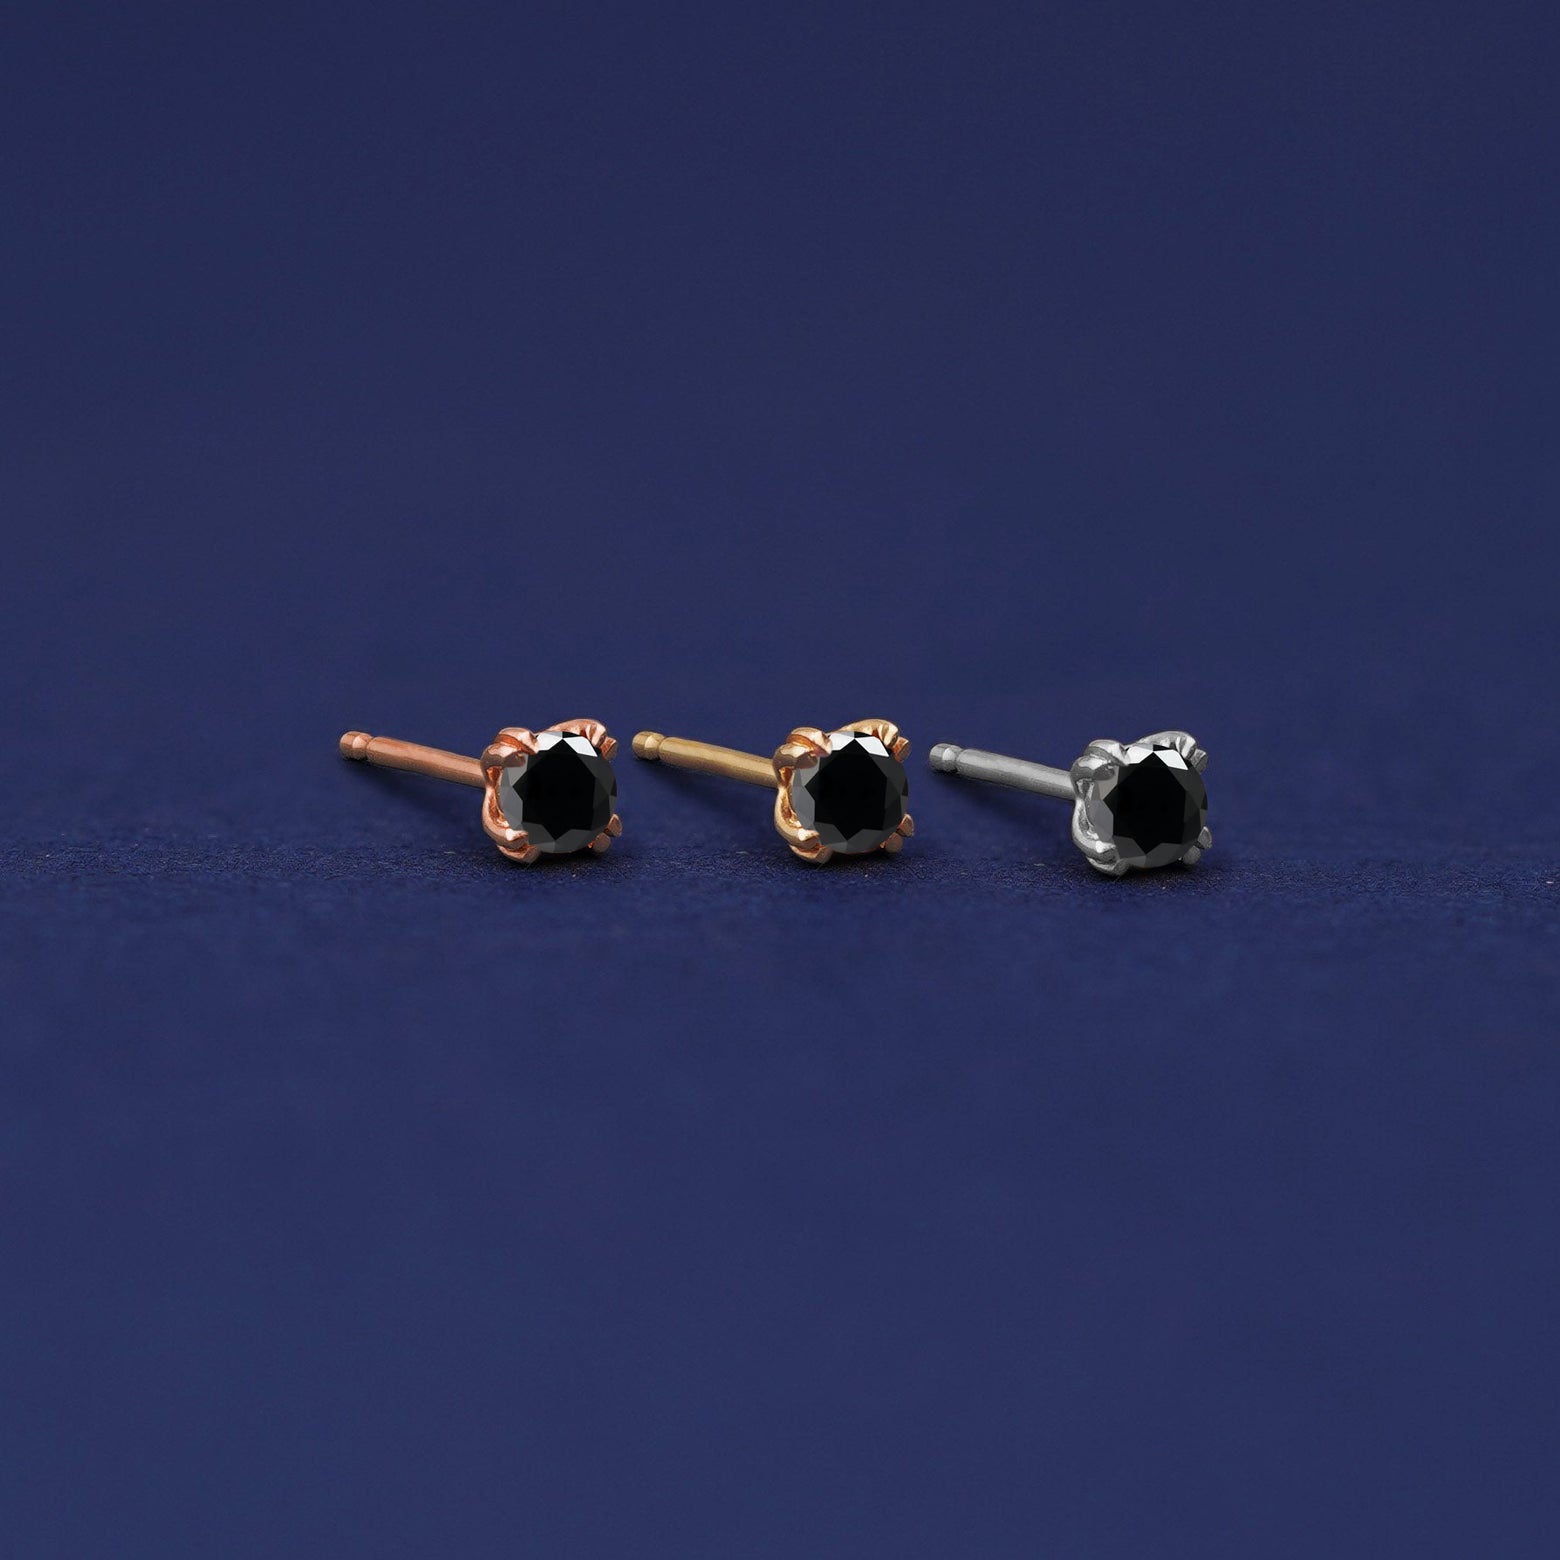 Three versions of the Black Diamond Earring shown in options of rose, yellow, and white gold